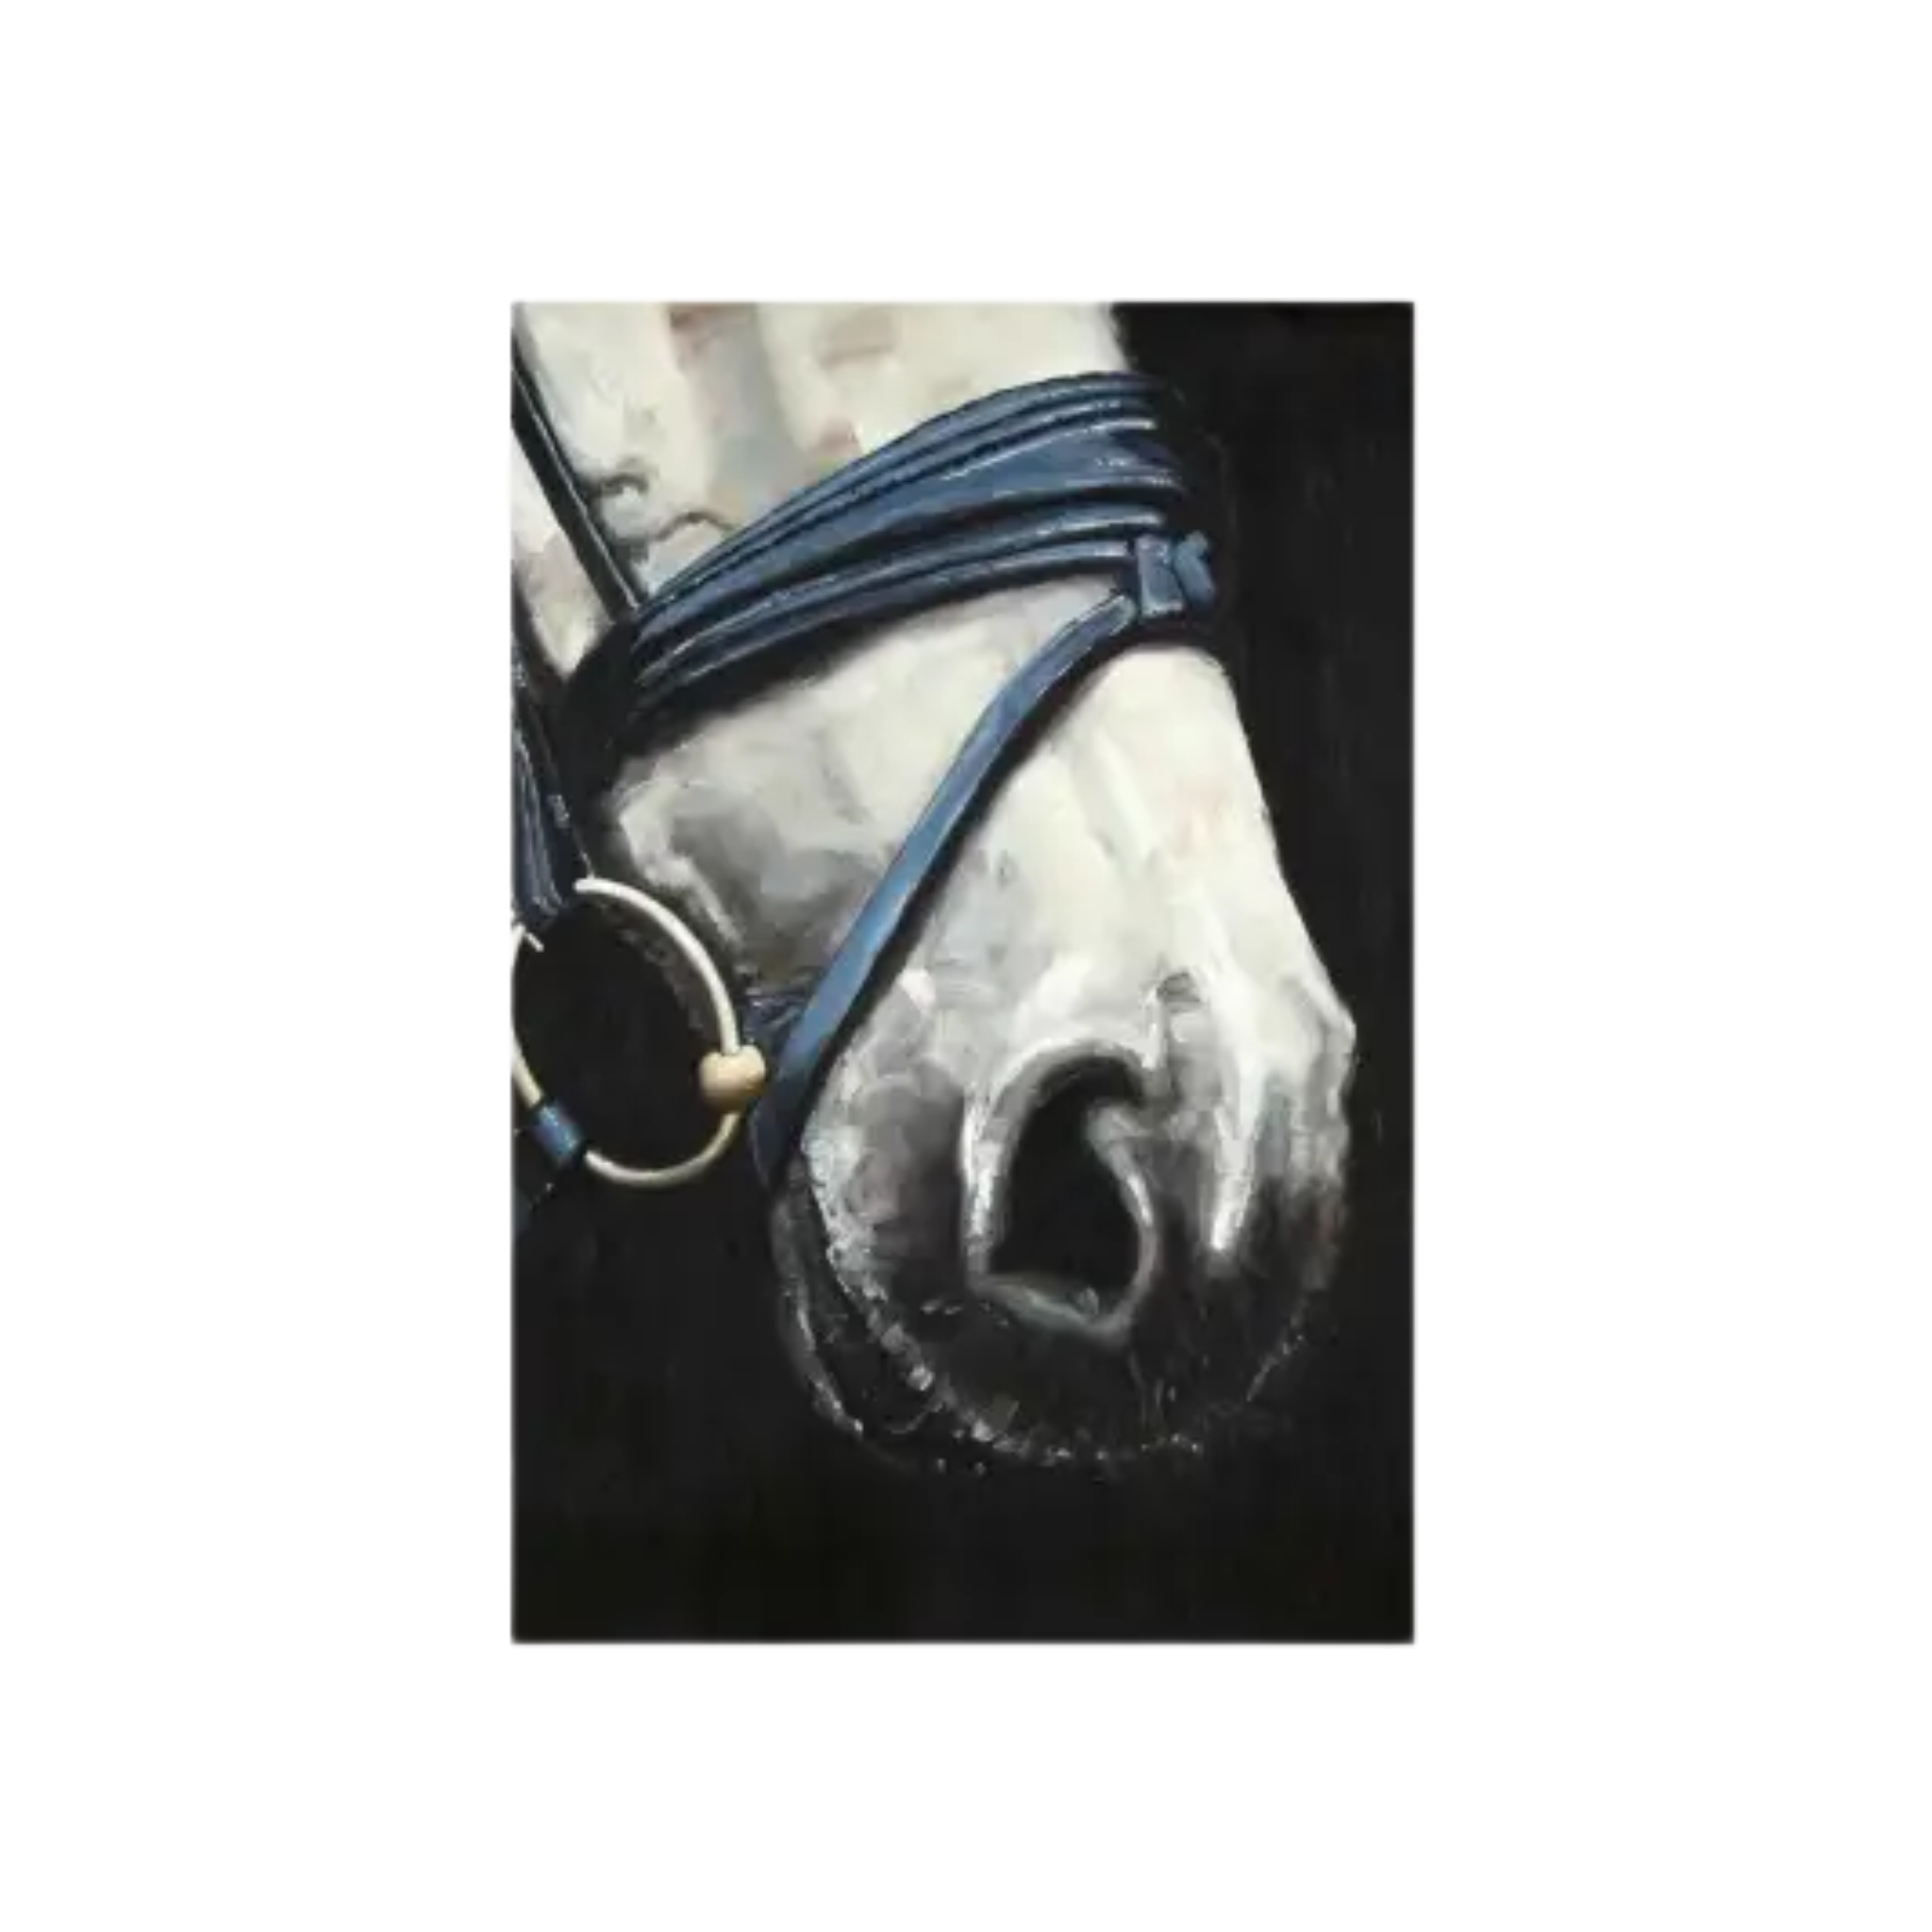 Horse With Harness | Fine art print on canvas 24" x 36"